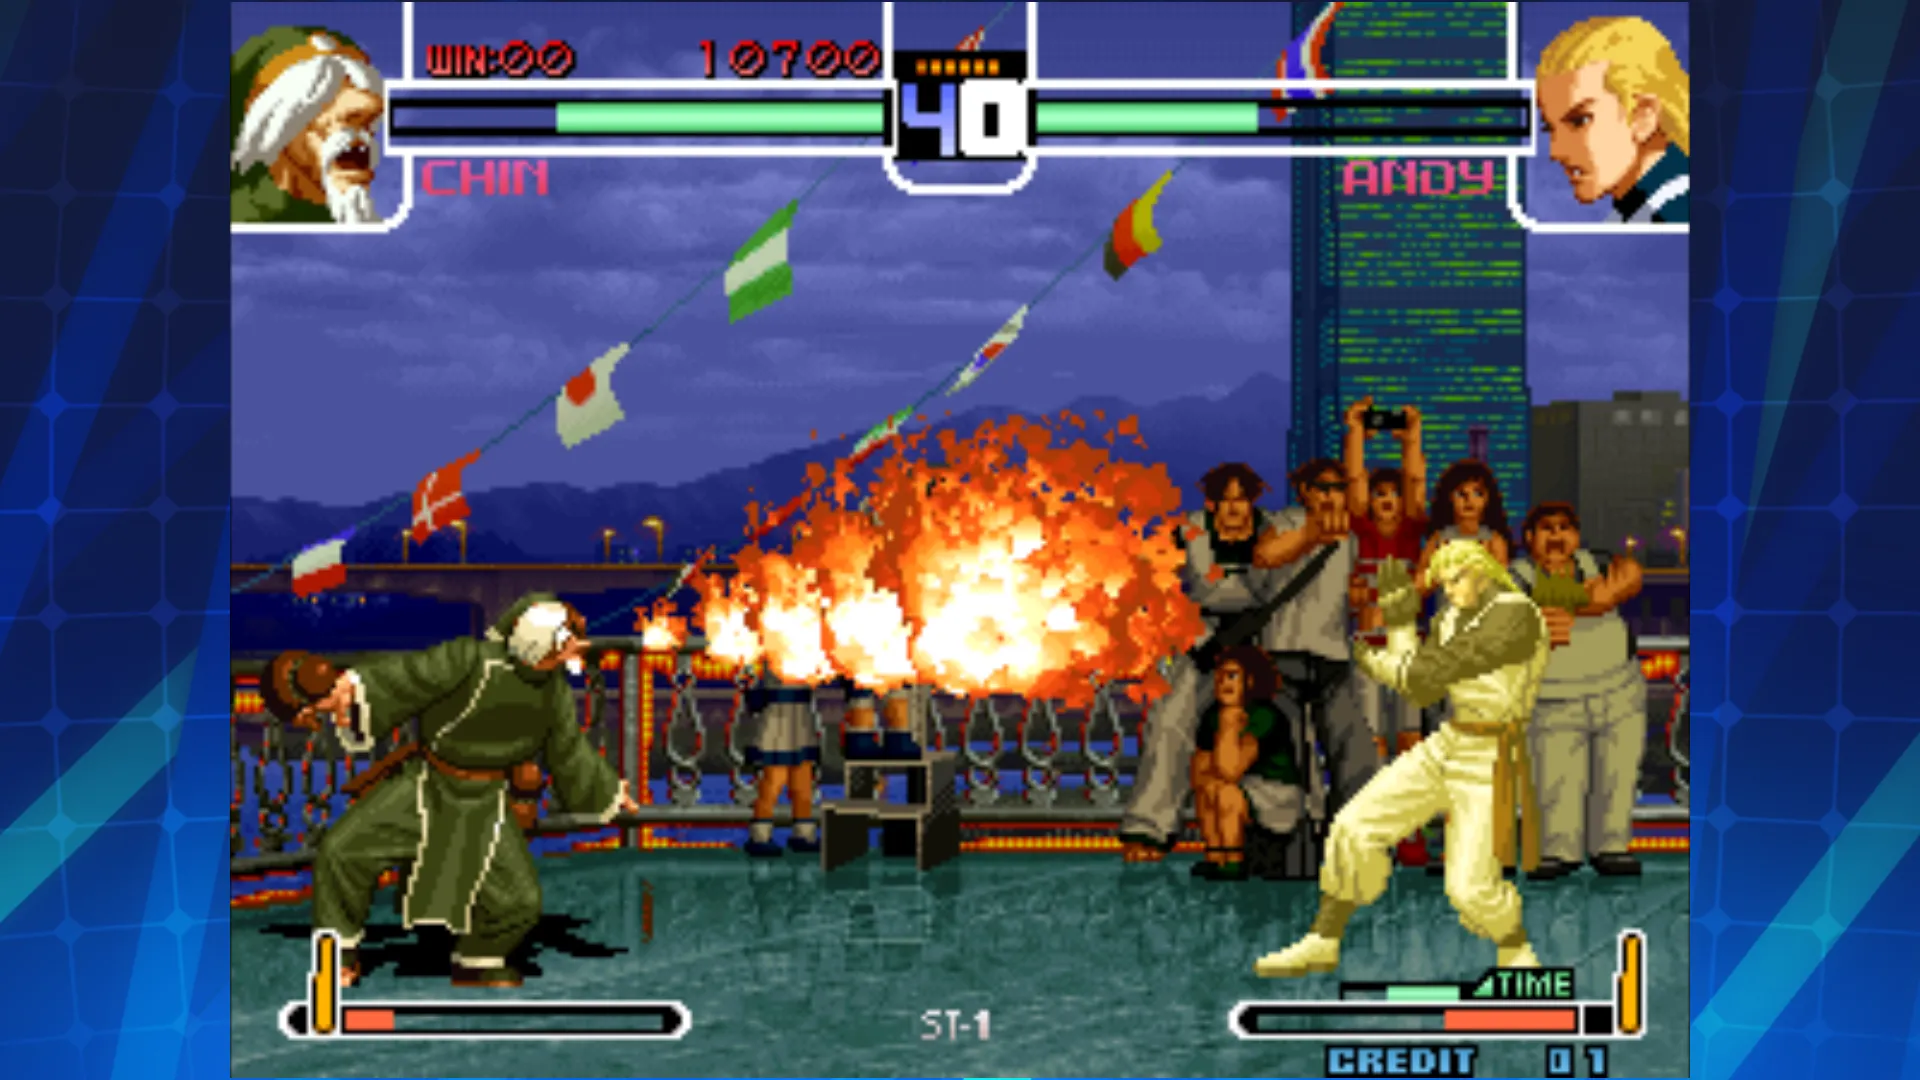 King of Fighters 2002